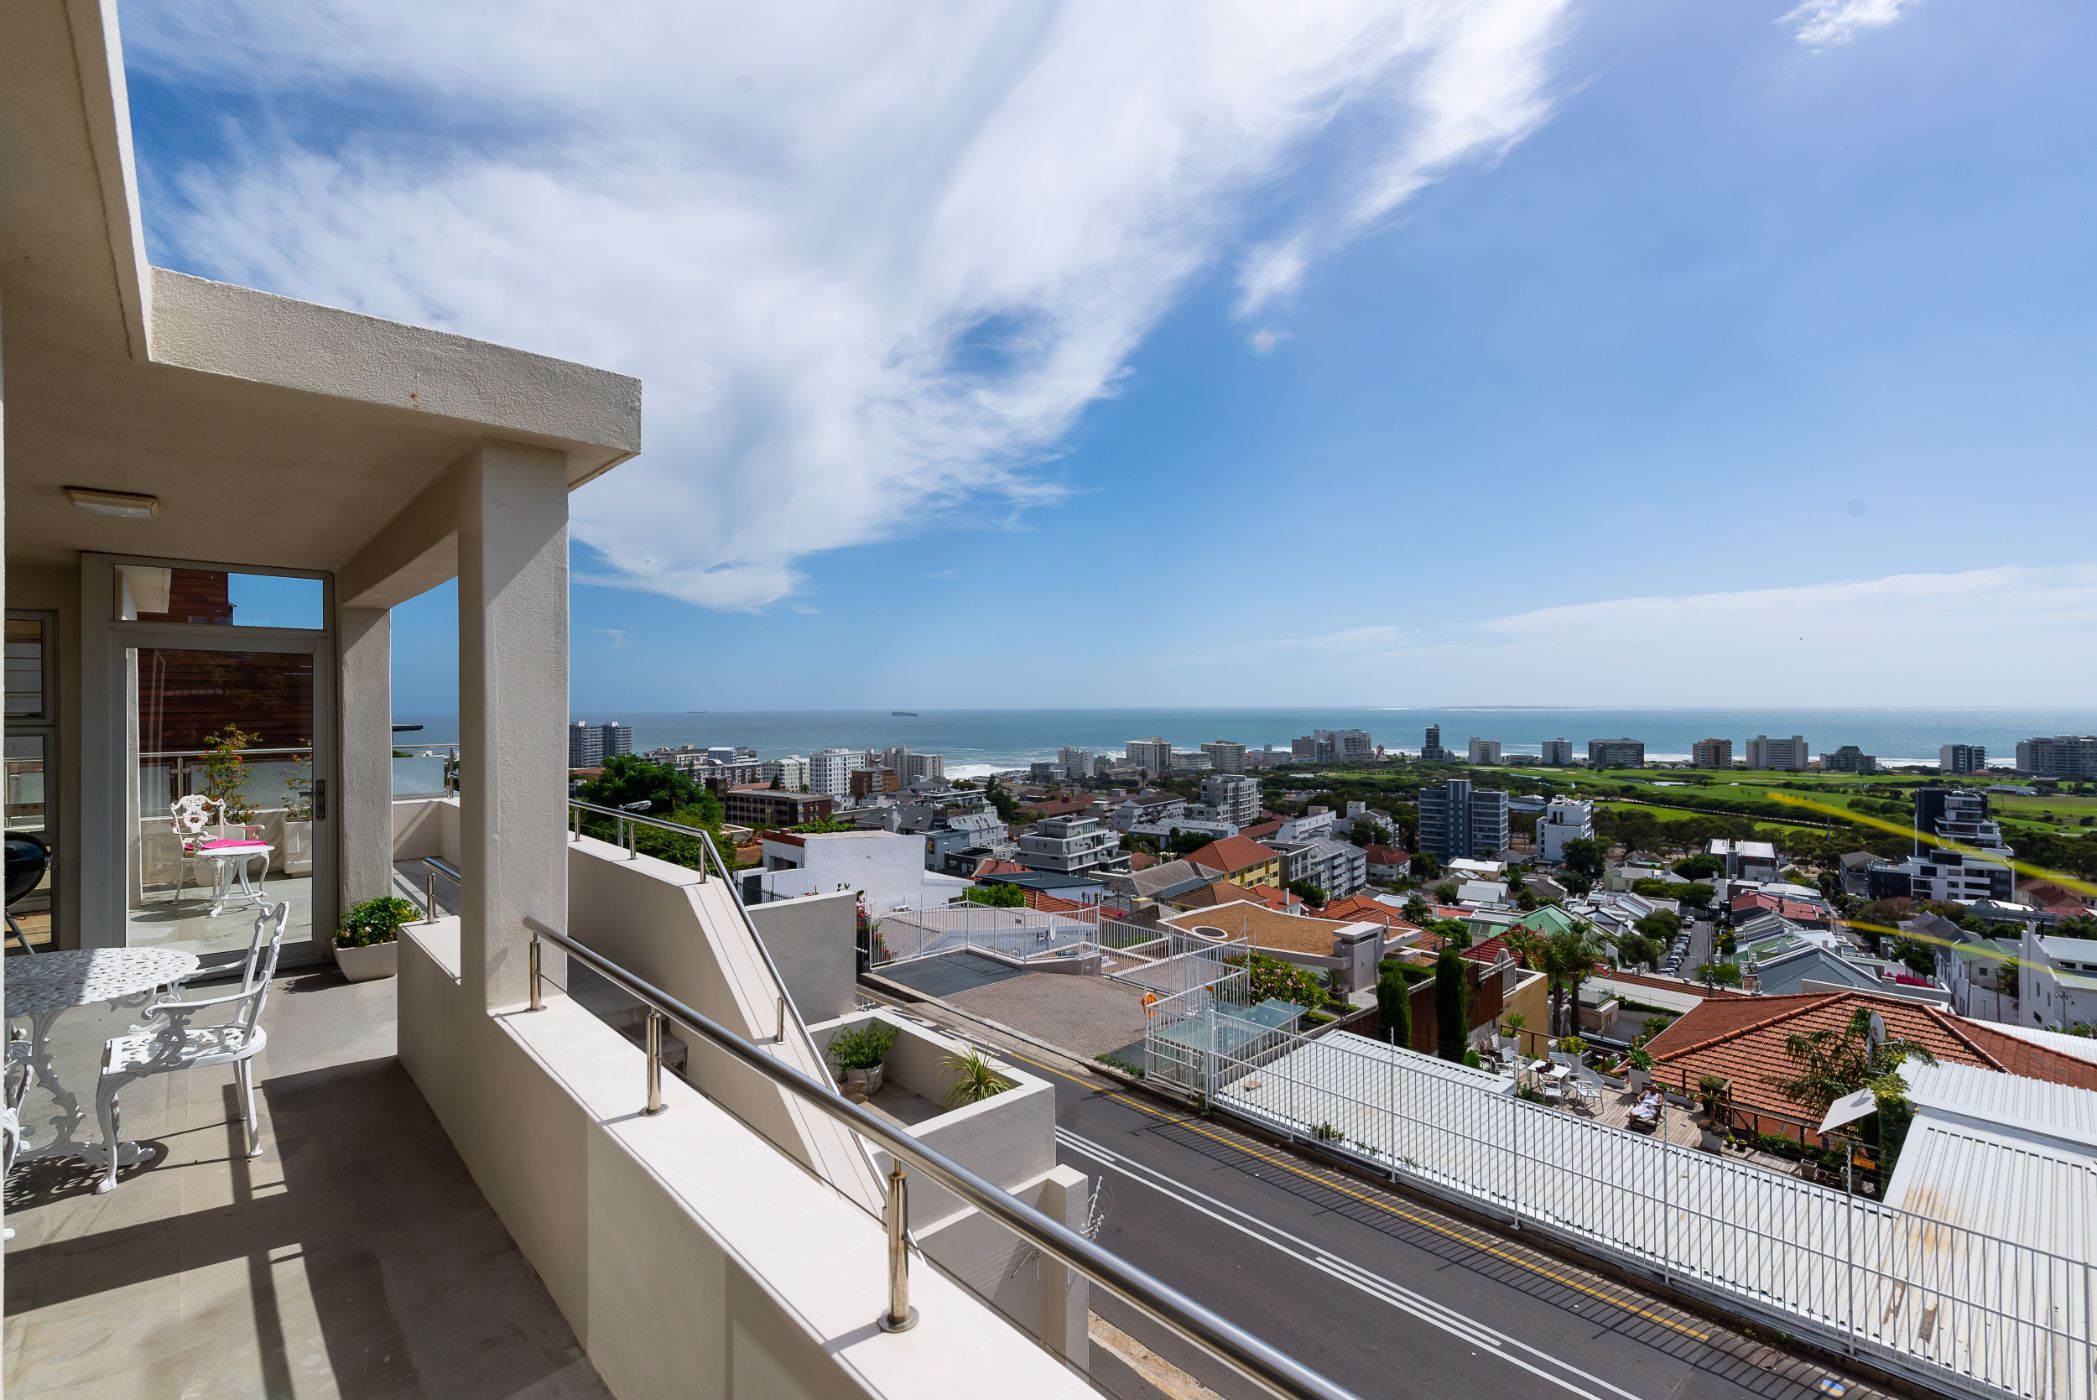 4 bedroom house for sale in Green Point (Cape Town)